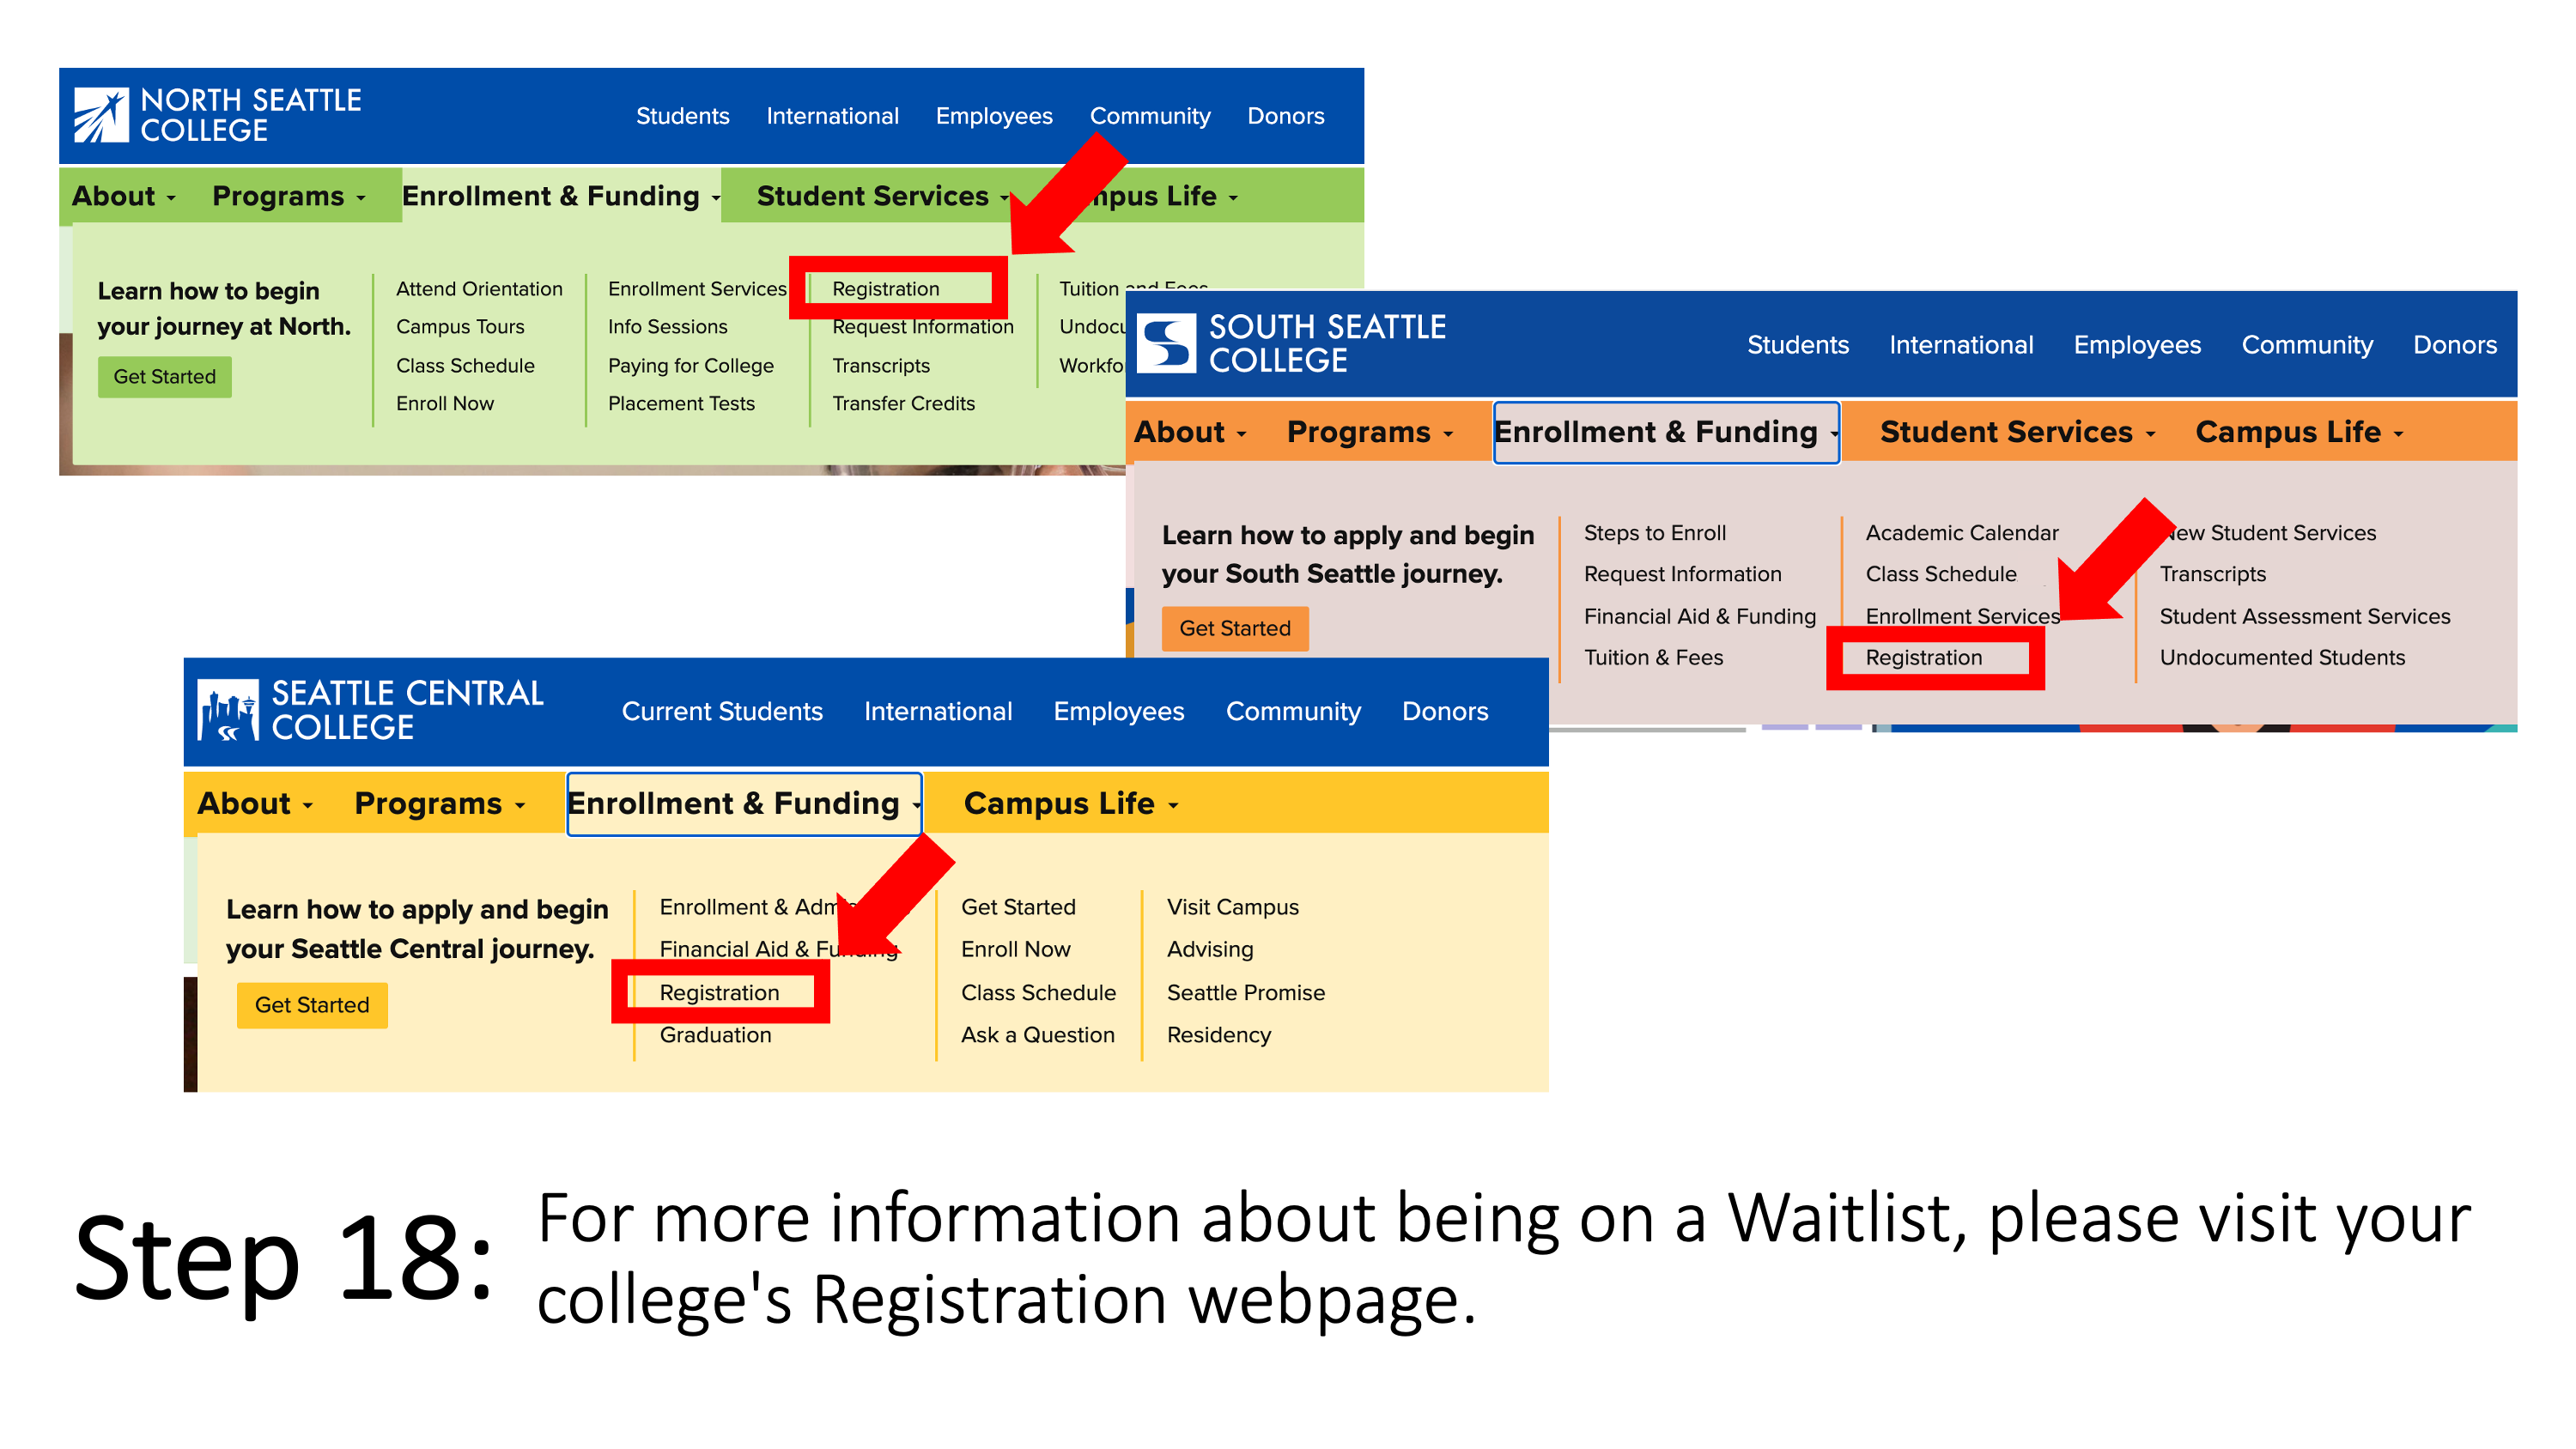 For more information about being on a Waitlist, please visit your college's Registration webpage.